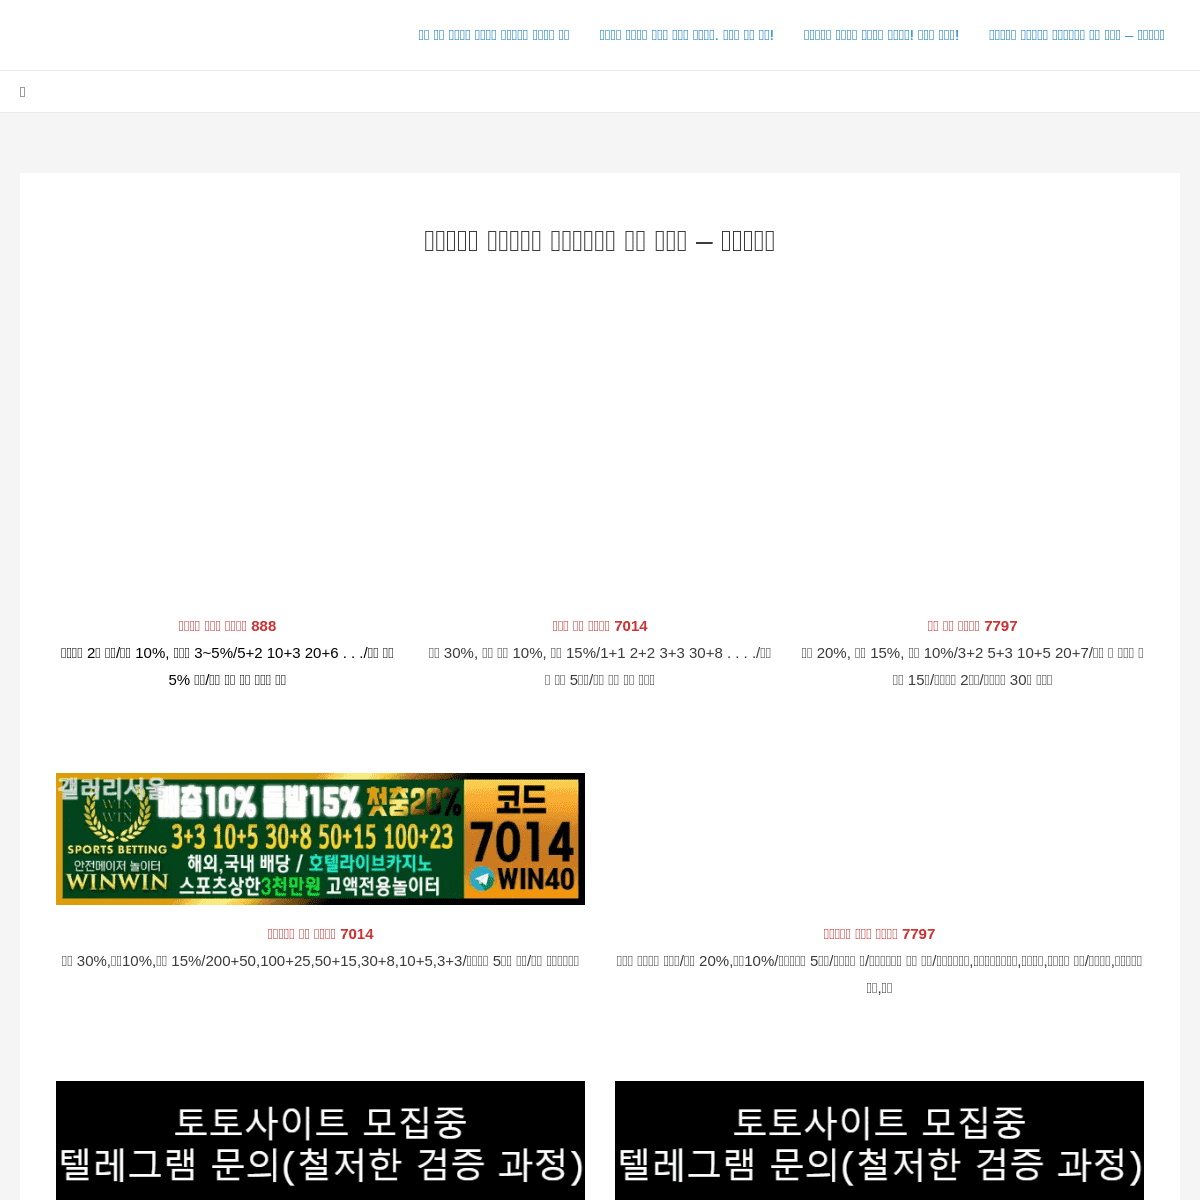 A complete backup of https://galleryseoul.com